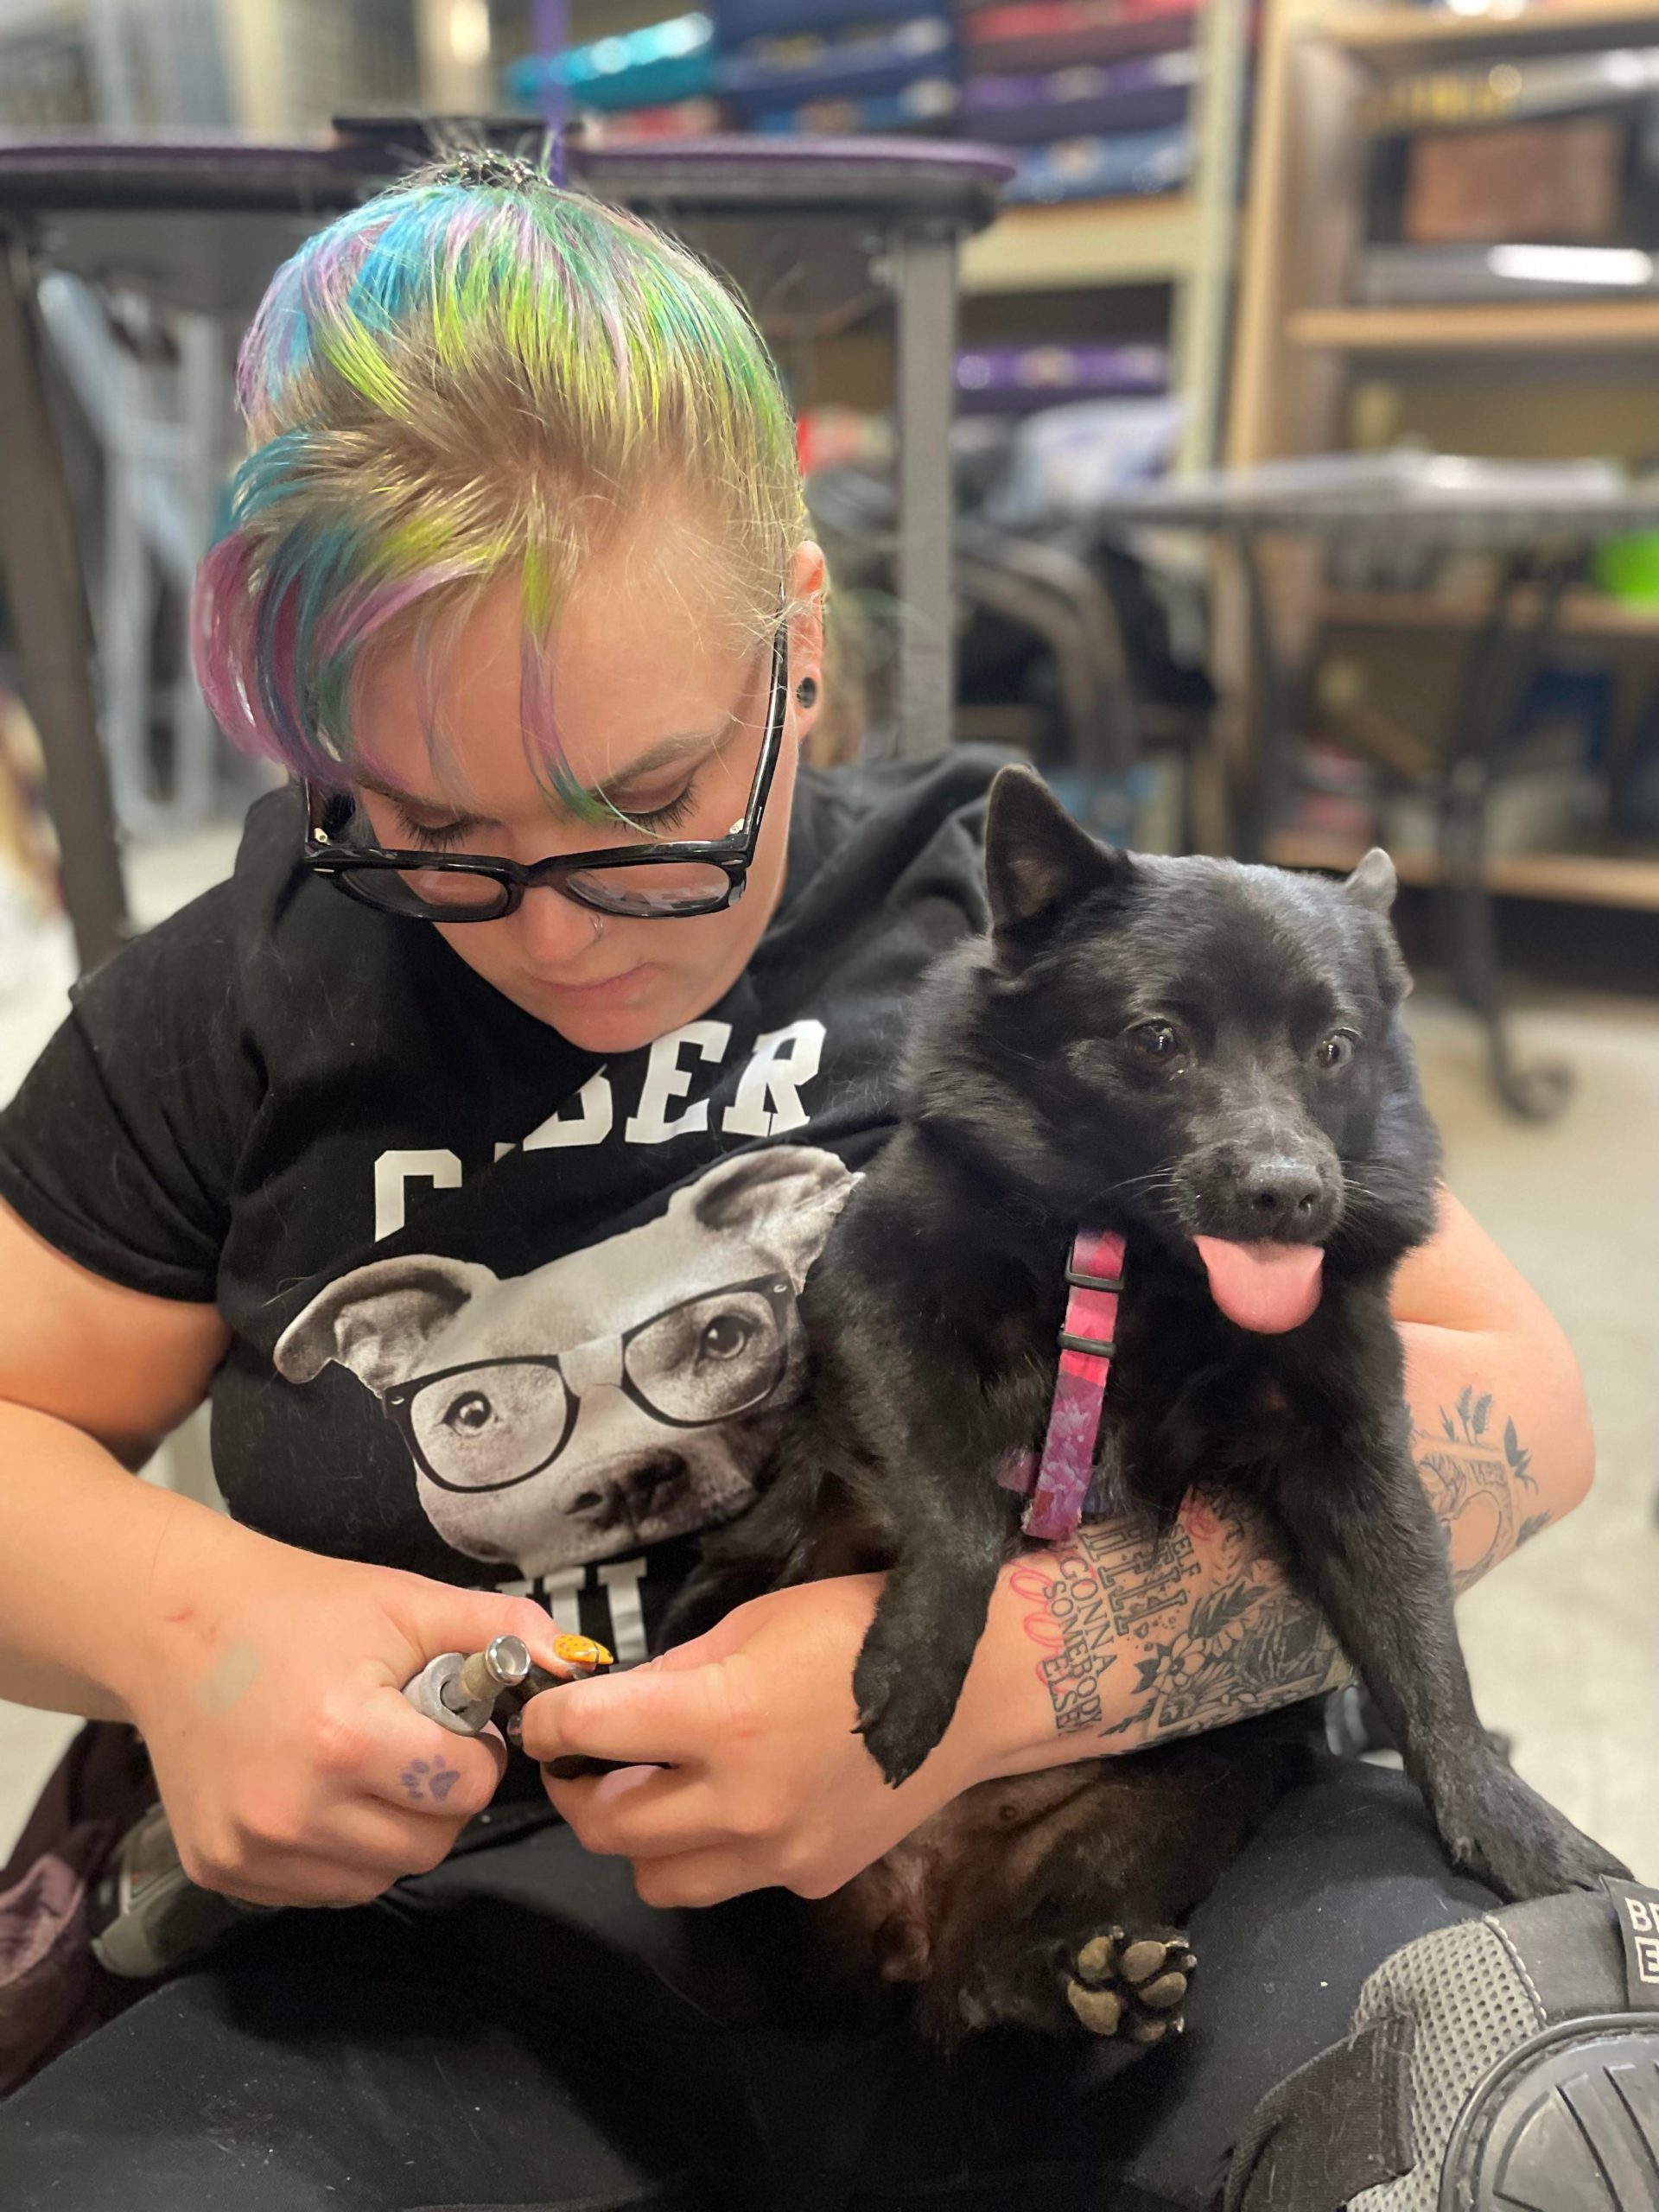 Bree from Nailed It Denver holds a small black dog with its tongue out why she gets the dogs nails trimmed.